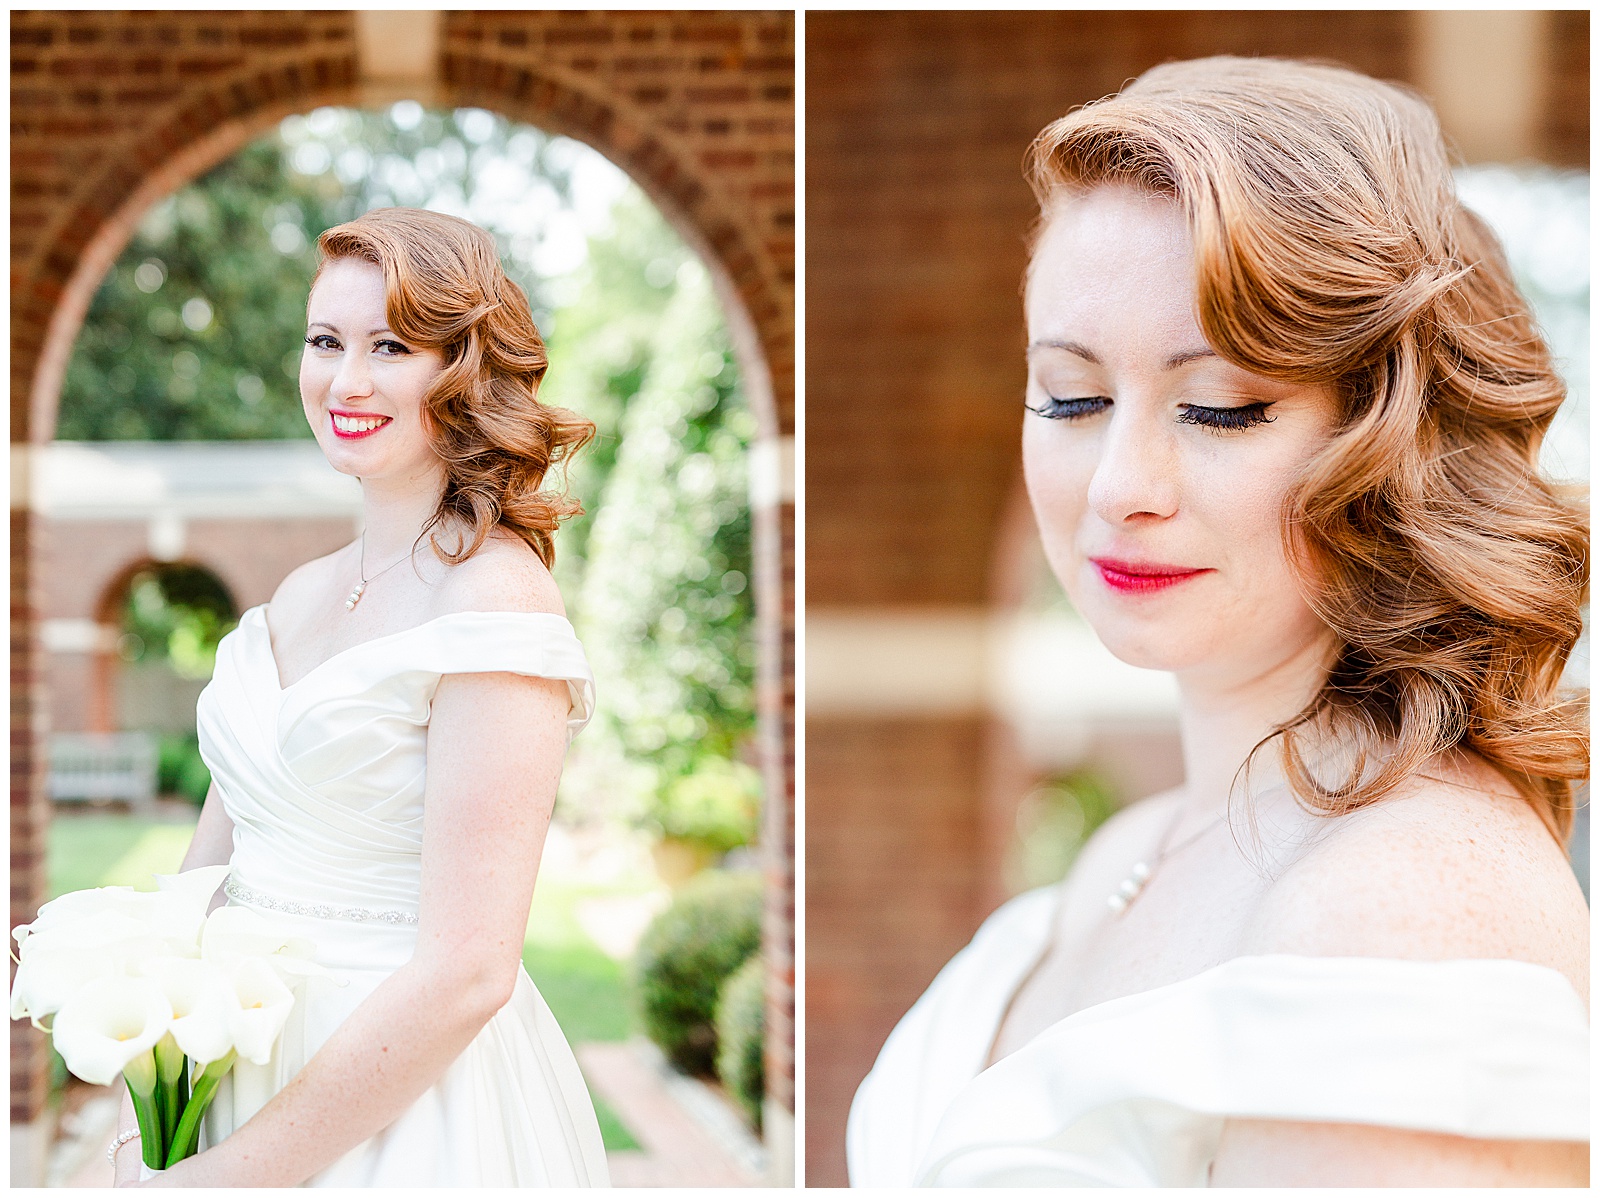 Elegant Red-Haired Bride and groom outdoor portraits for Gorgeous 1940s Modern Vintage Wedding in Charlotte, NC | check out the full wedding at KevynDixonPhoto.com